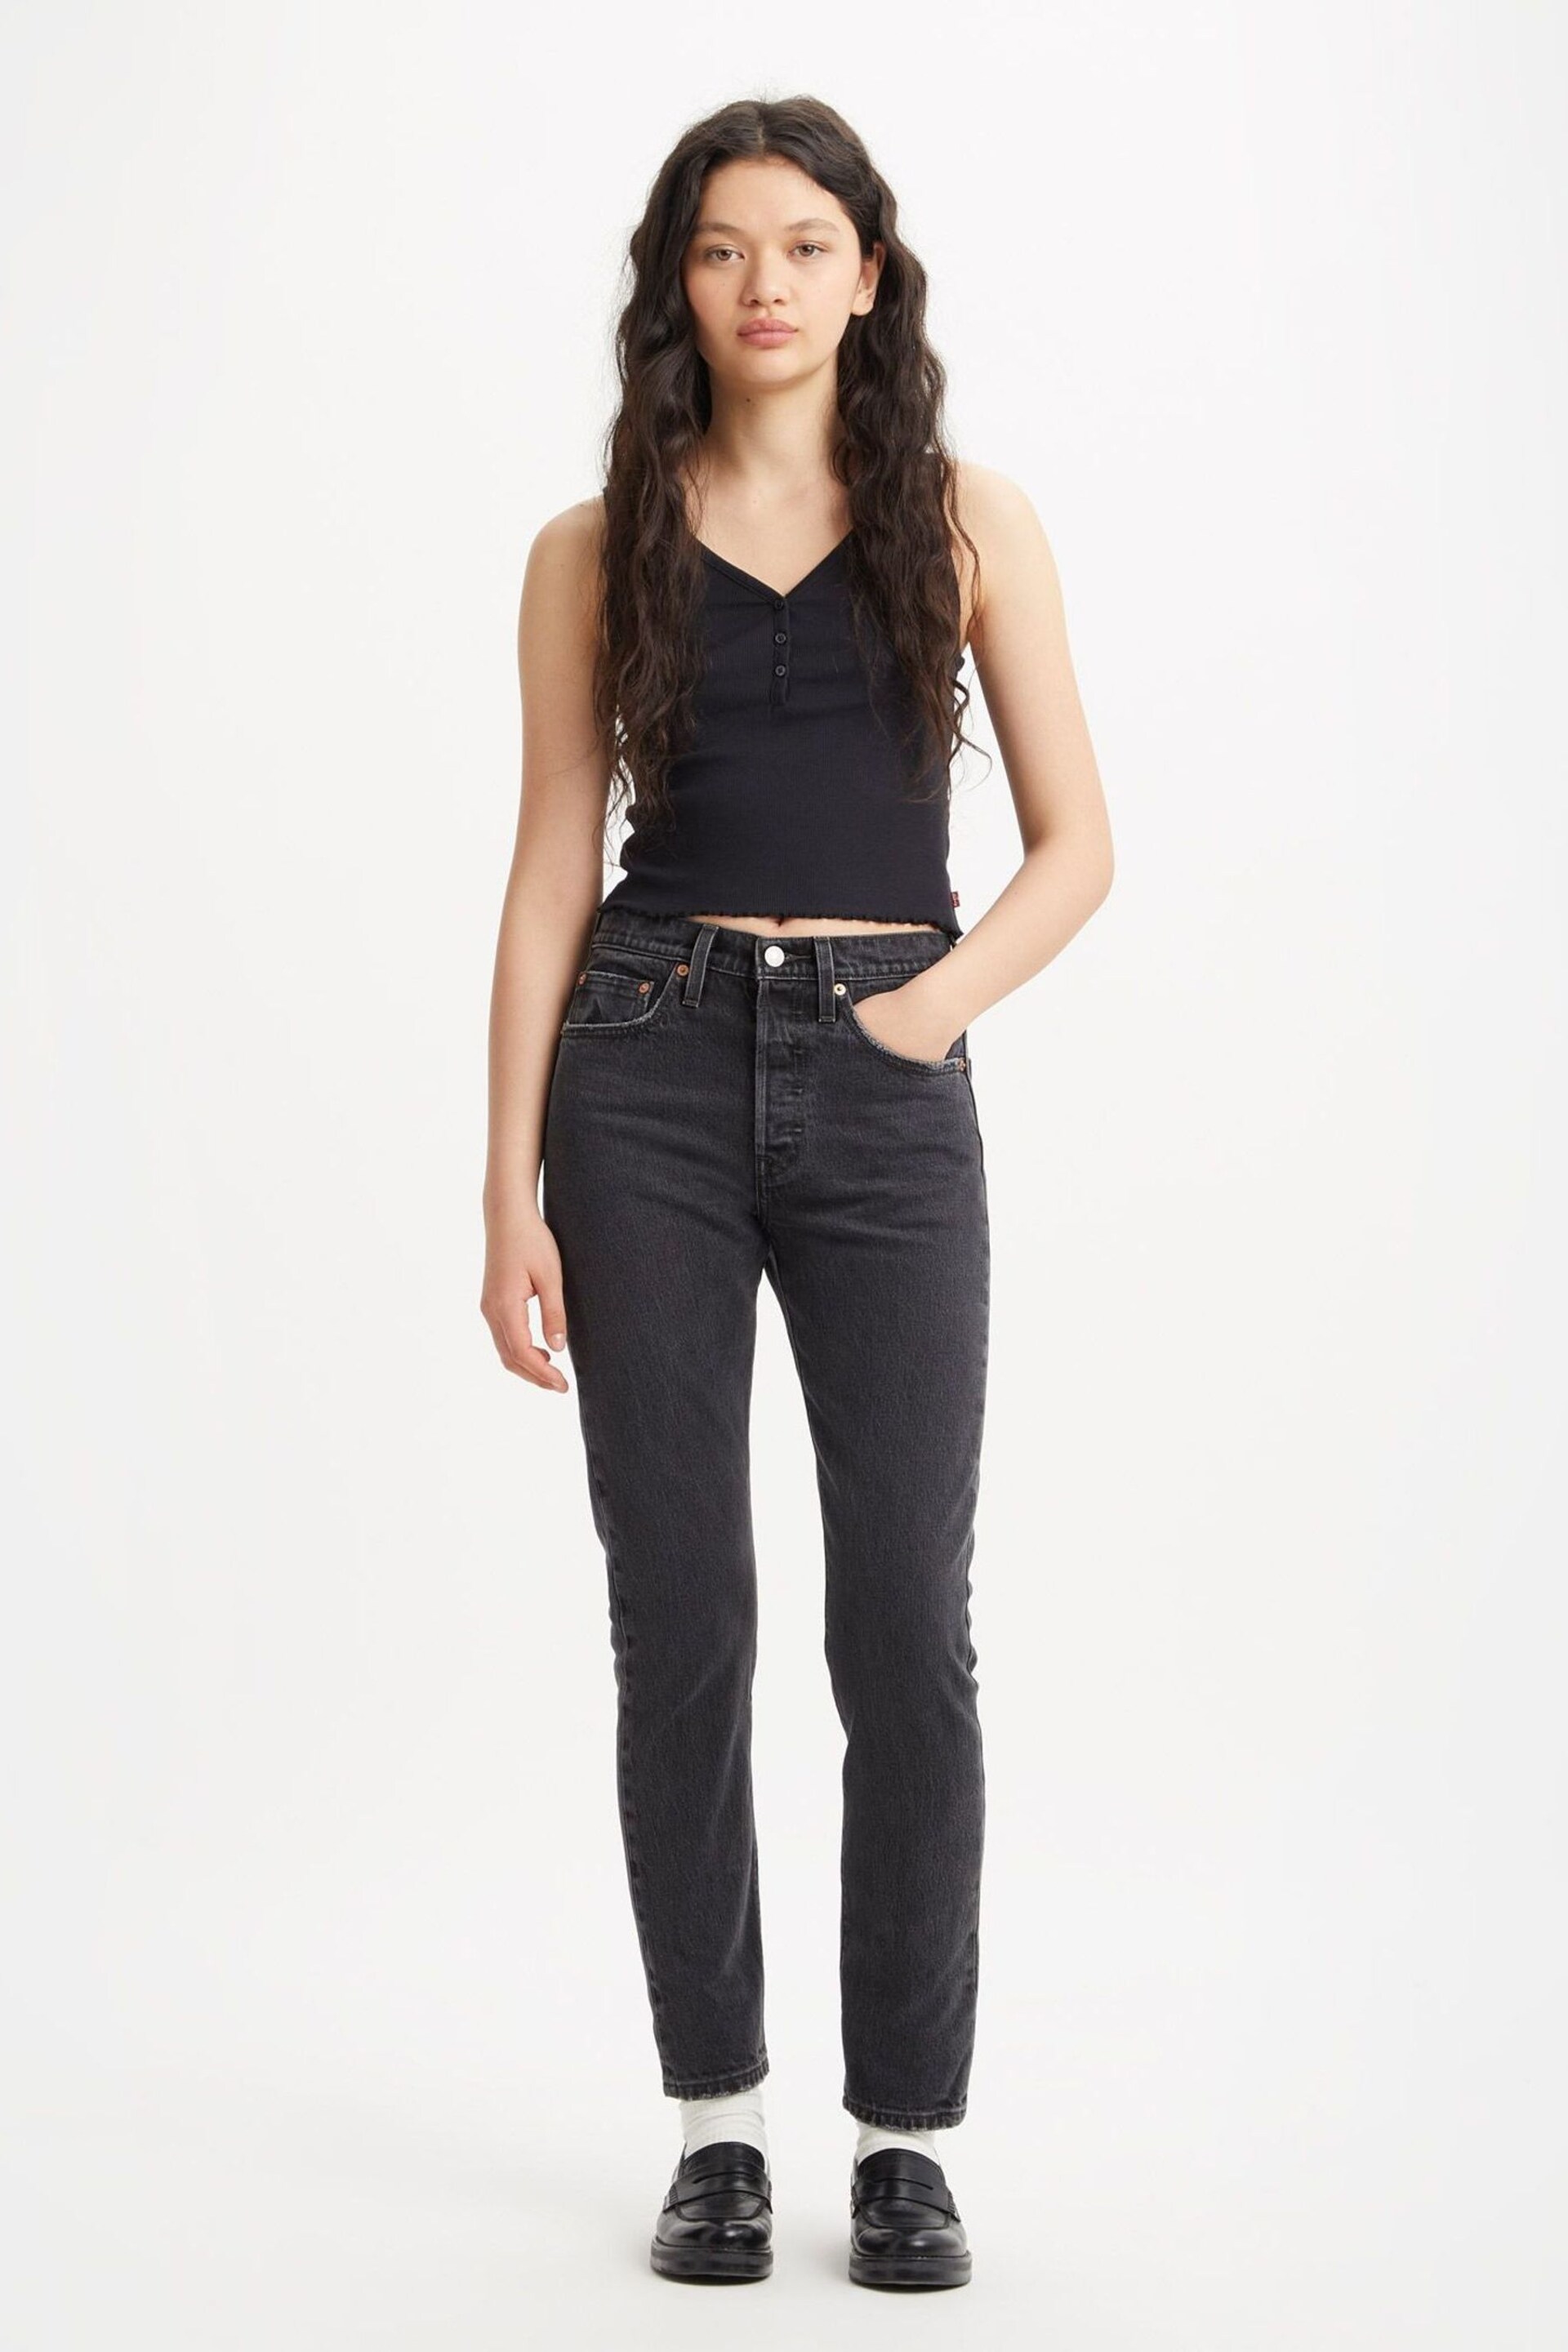 Levi's® Off Topic Washed Black 501® Youth Skinny Jeans - Image 3 of 8